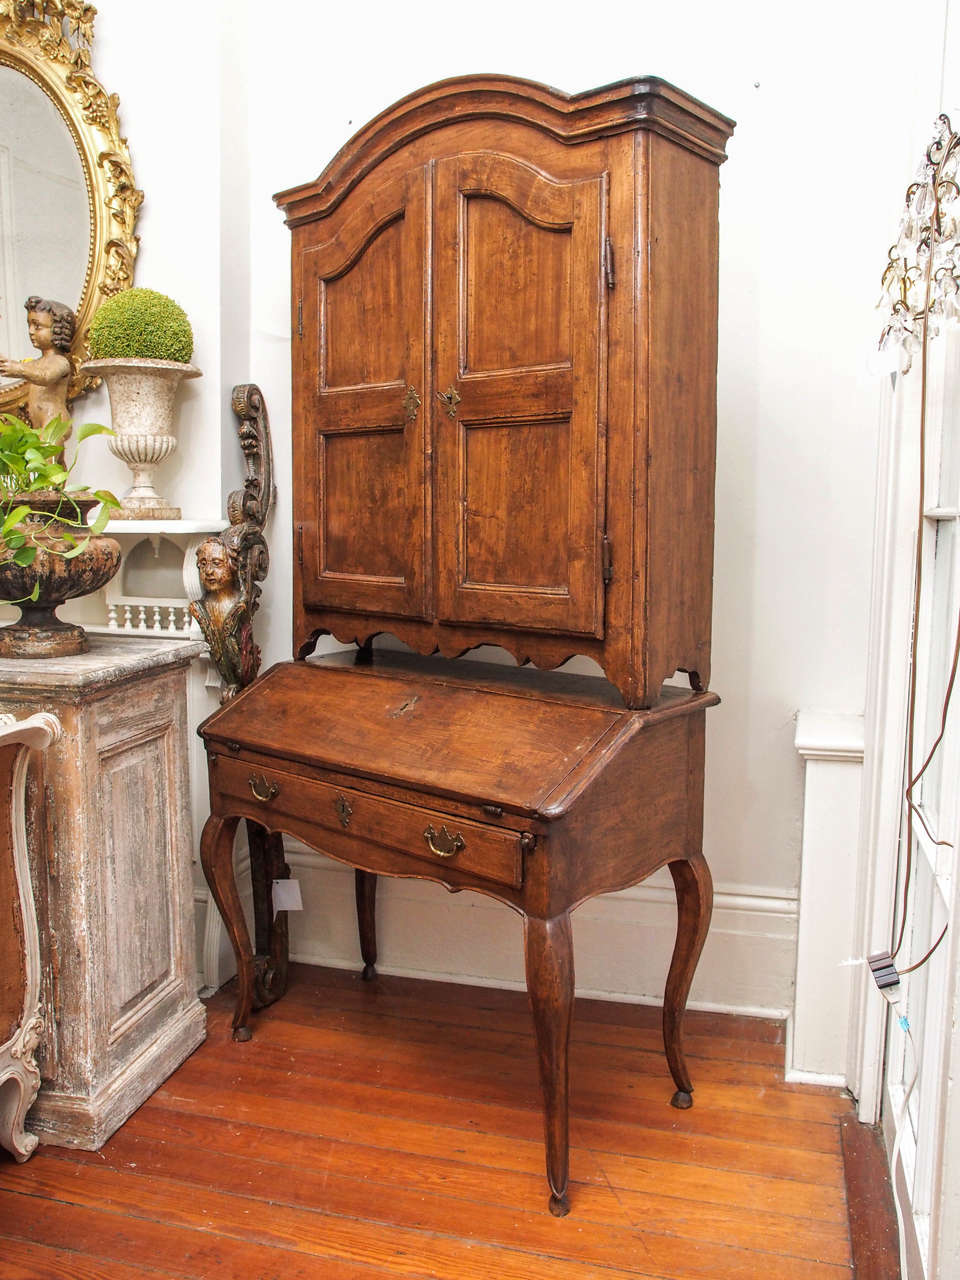 Early 19th Century walnut 2 parts French writing desk . Bottom part opens with a front drop desk with one drawer.  Cabriole legs. Top part is a bookcase with 4 shelves.